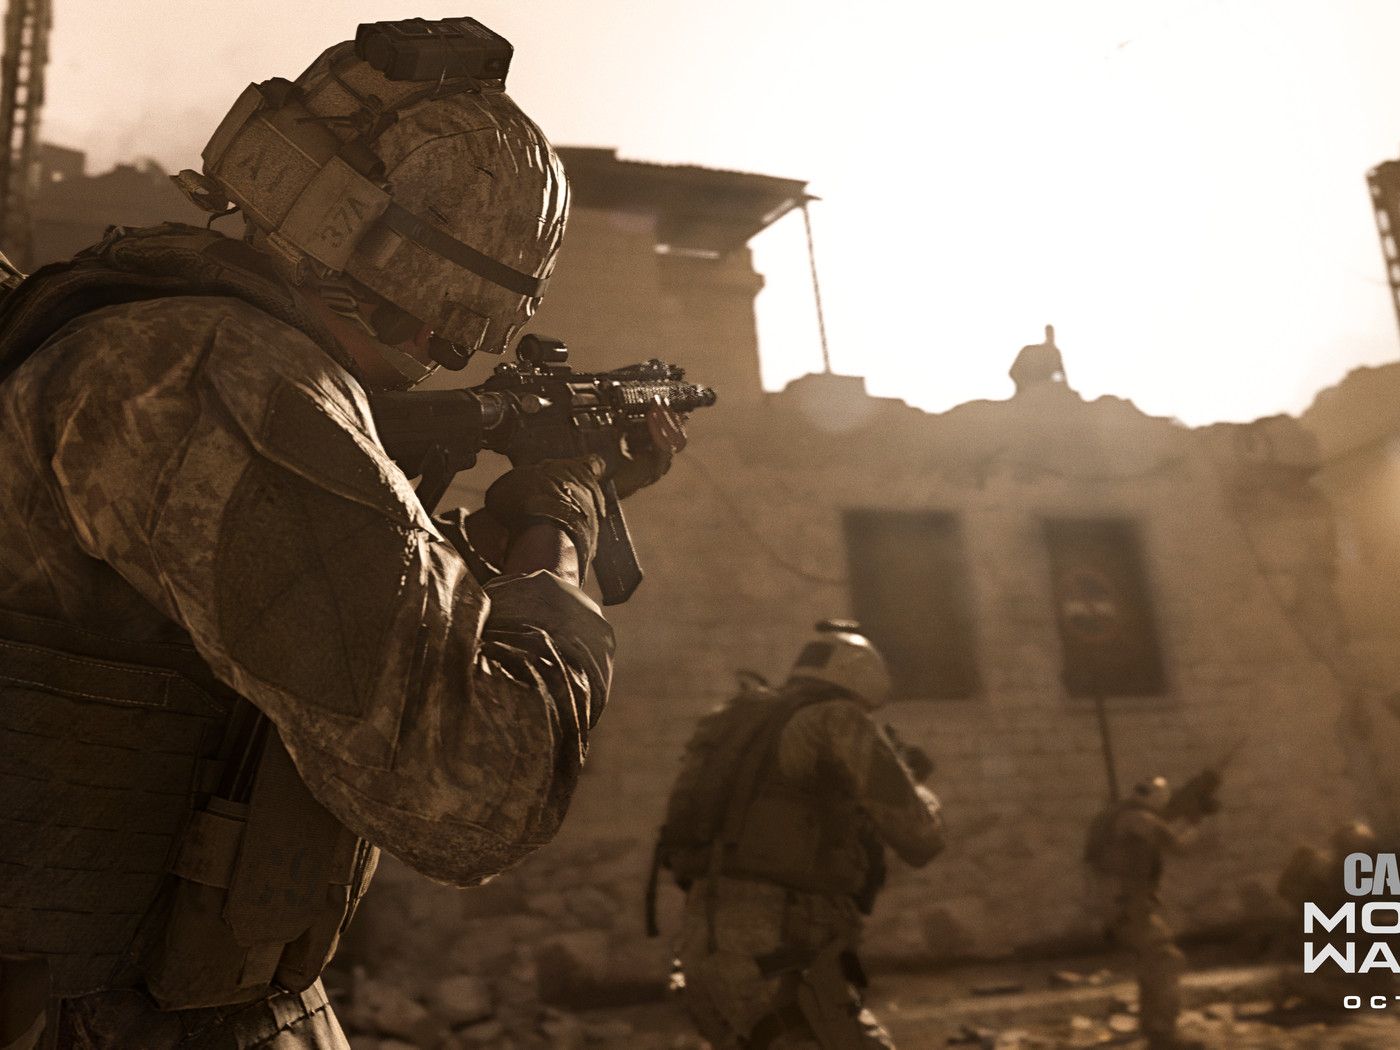 Call of Duty games can depict Humvees without a license, says judge